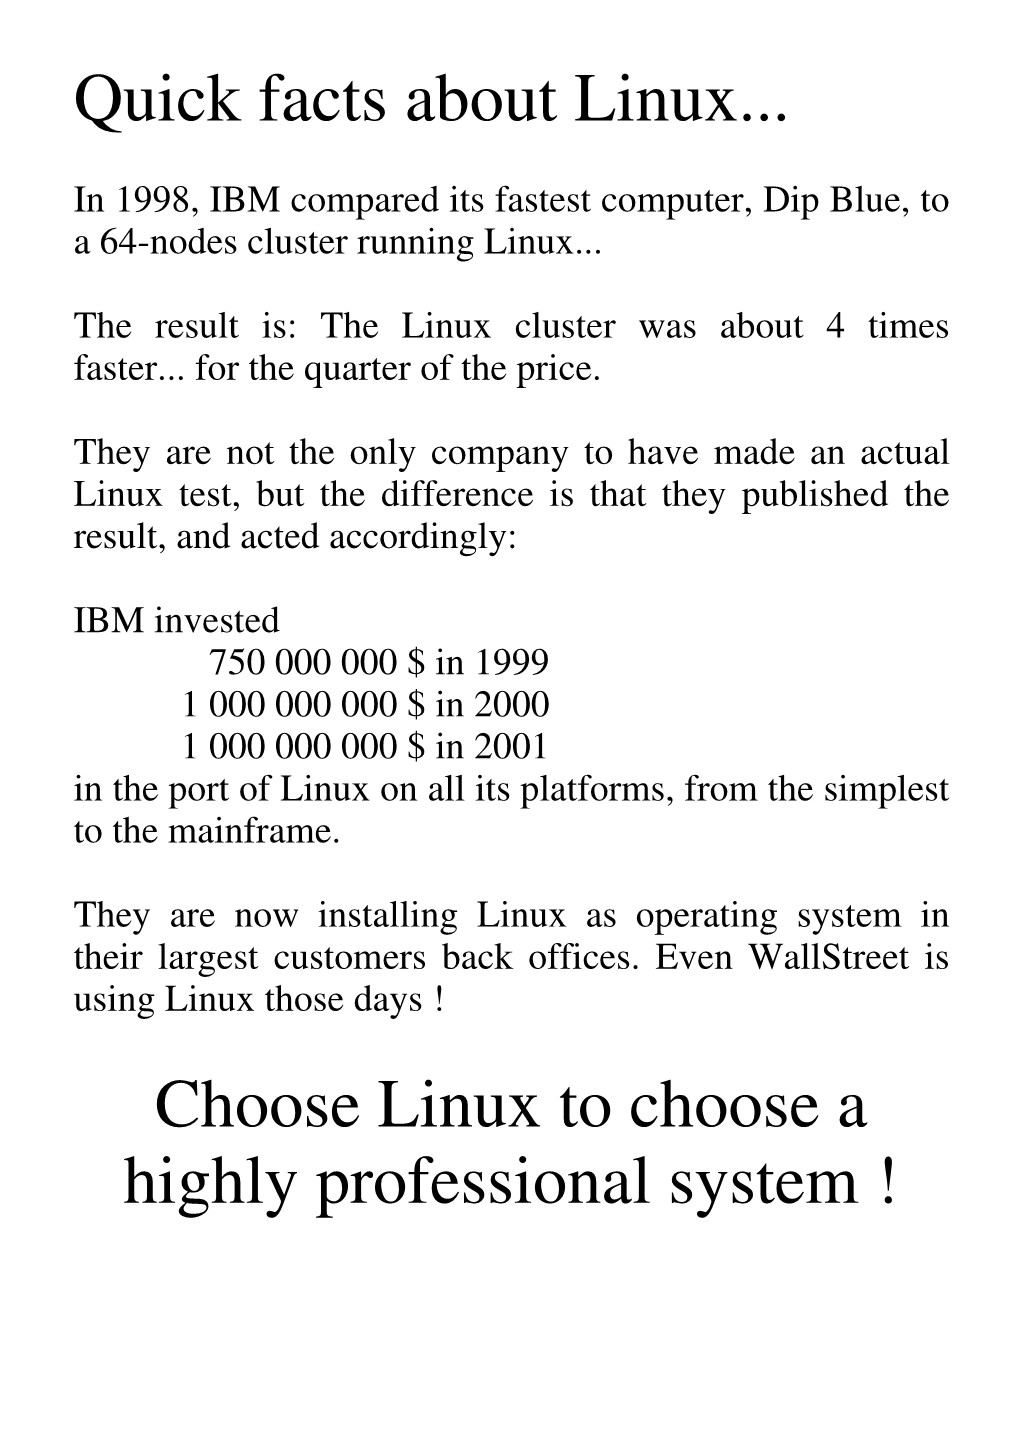 Quick Facts About Linux... Choose Linux to Choose A